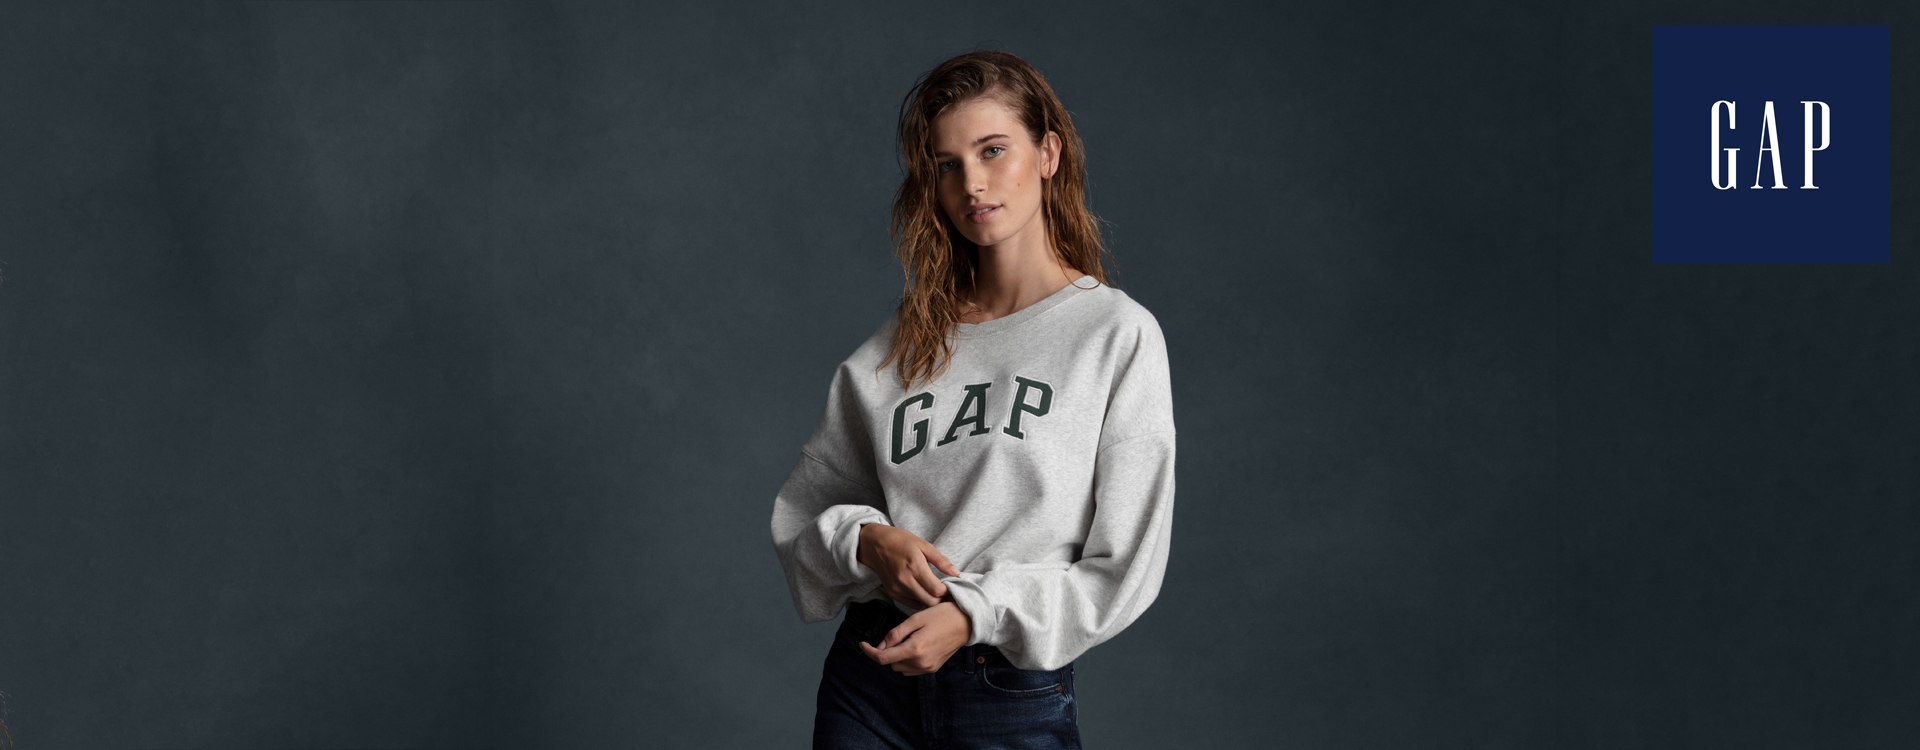 Super offer from GAP! 20% discount